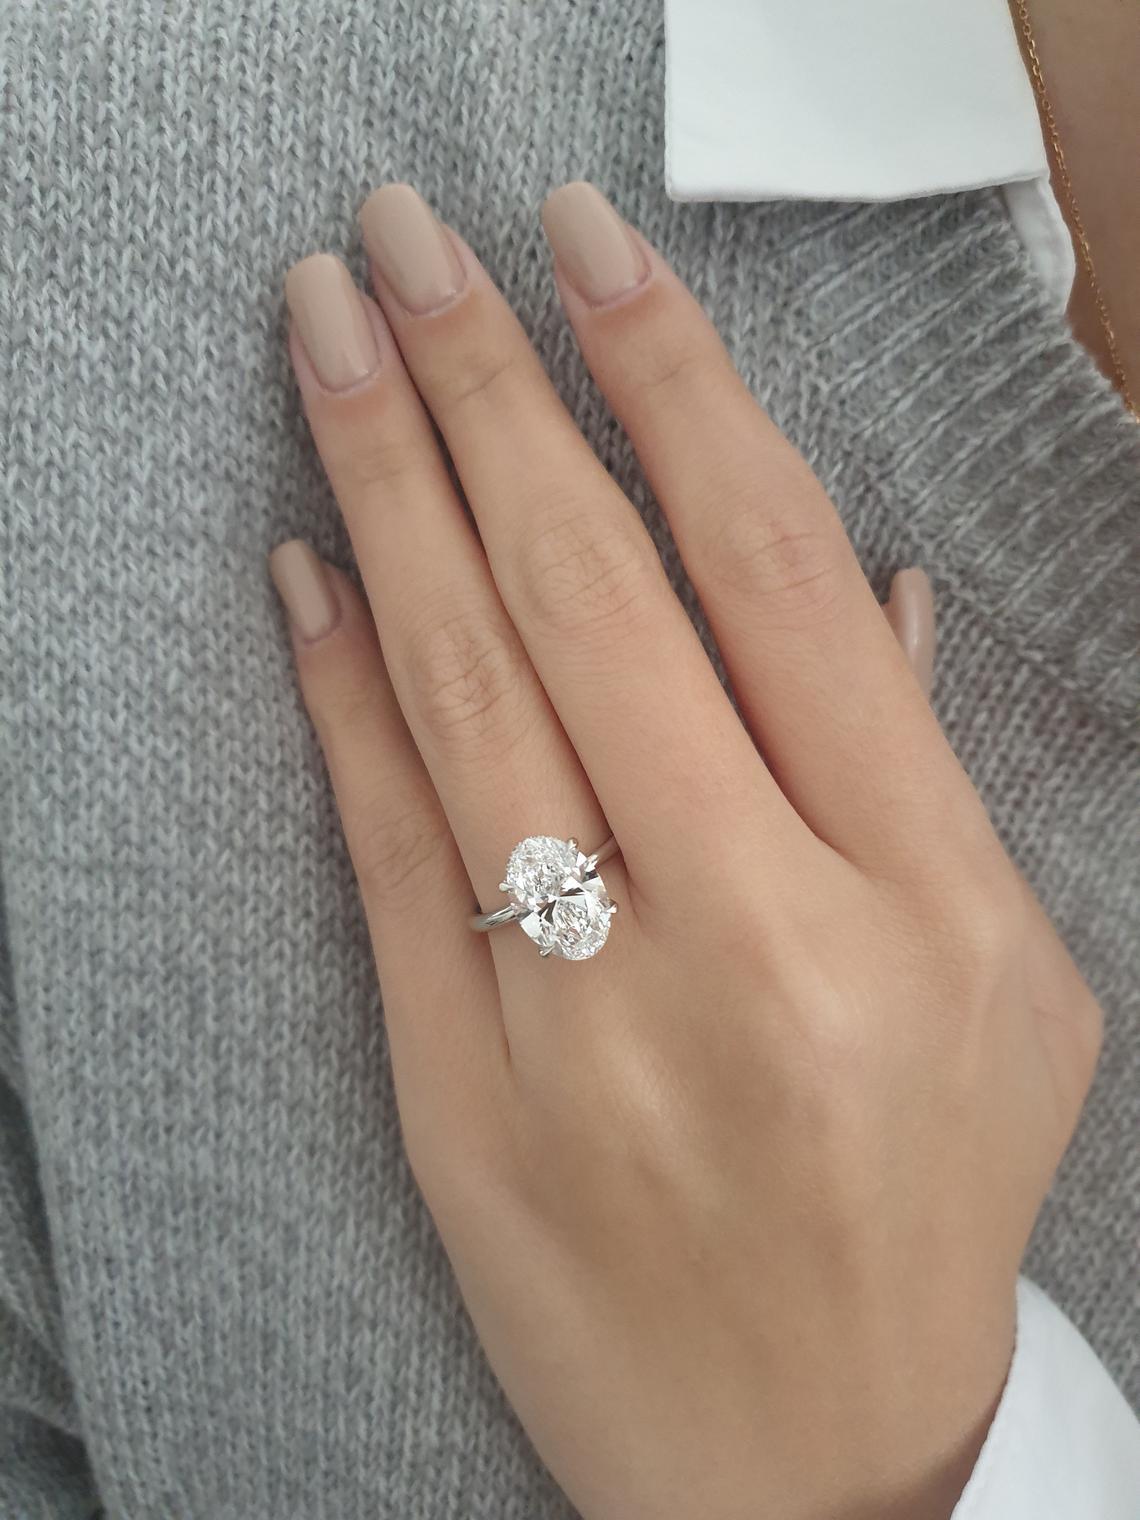 Exceptiona 2.85 carats diamond an oval shape with great luster triple excellent polish, excellent cut
E Color
Is graded vvs2 for clarity, the diamond is 100% eye clean. 

The diamond has a stunning look with mesmerizing and lively sparkle, and it is